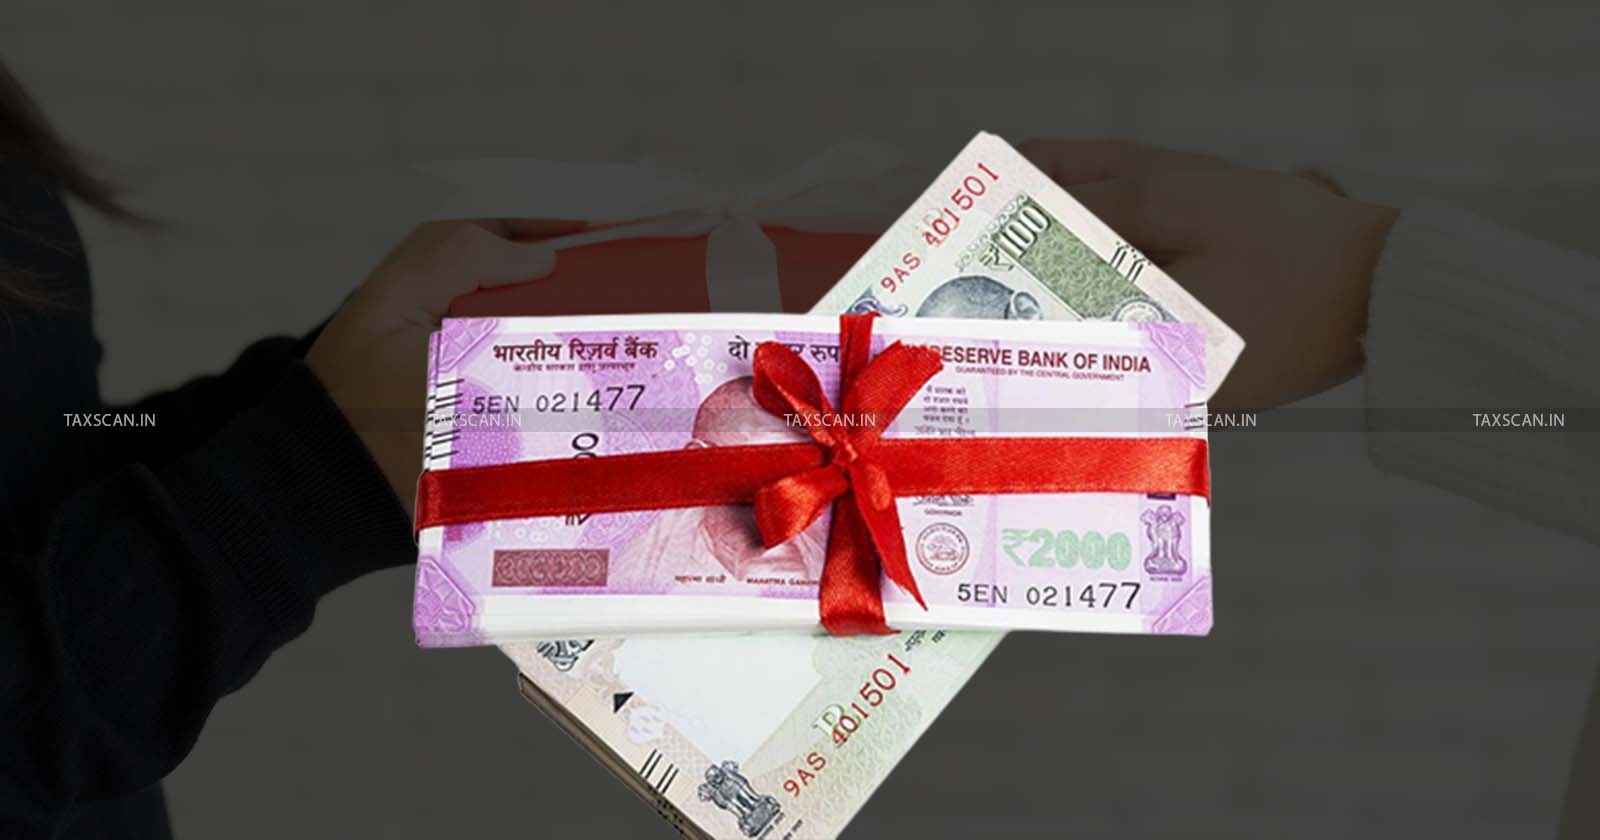 Gifts from relatives are always tax-free - The Economic Times